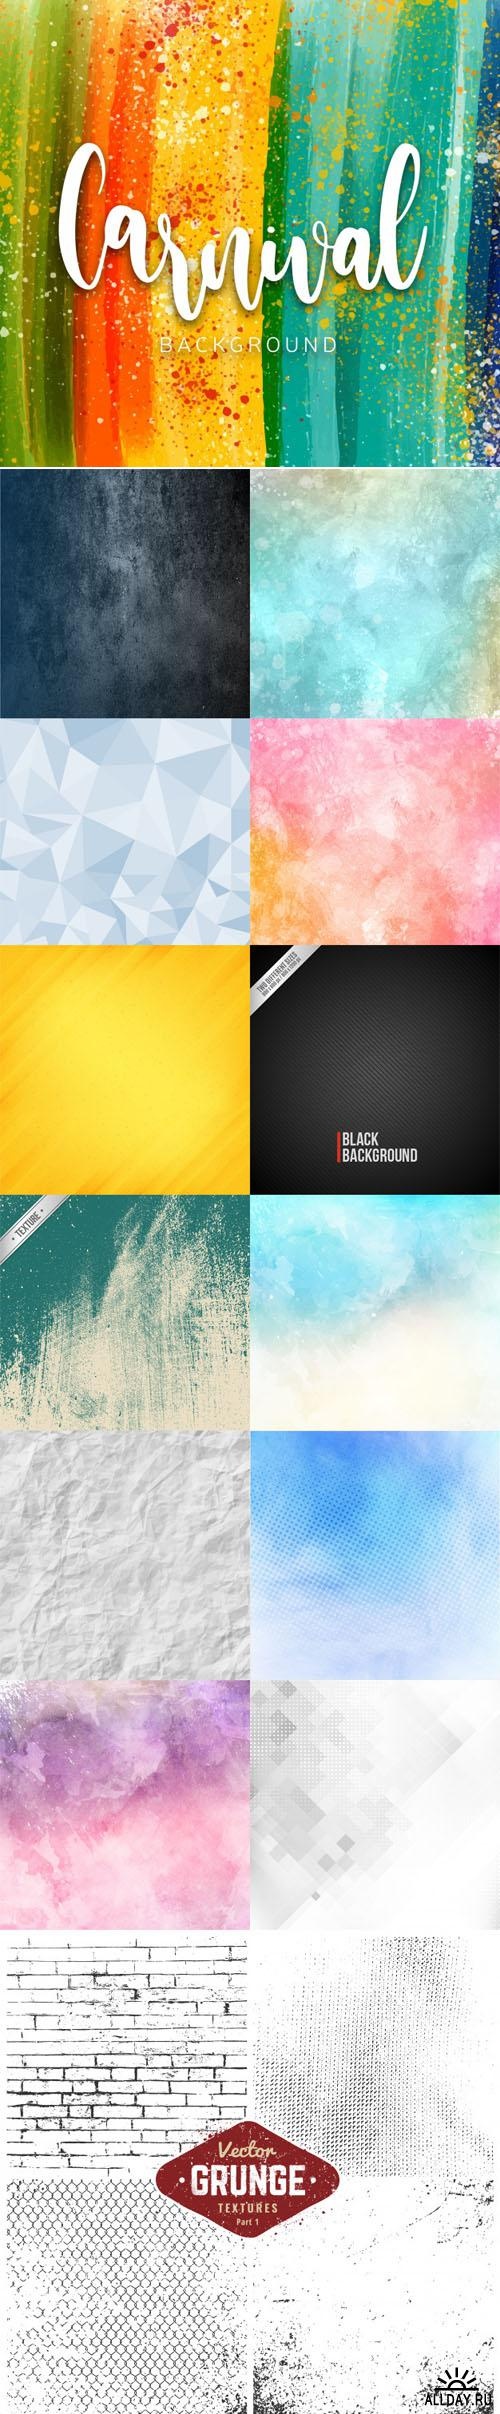 14 Textures Backgrounds Vector ((eps ((ai - 3 (11 files)